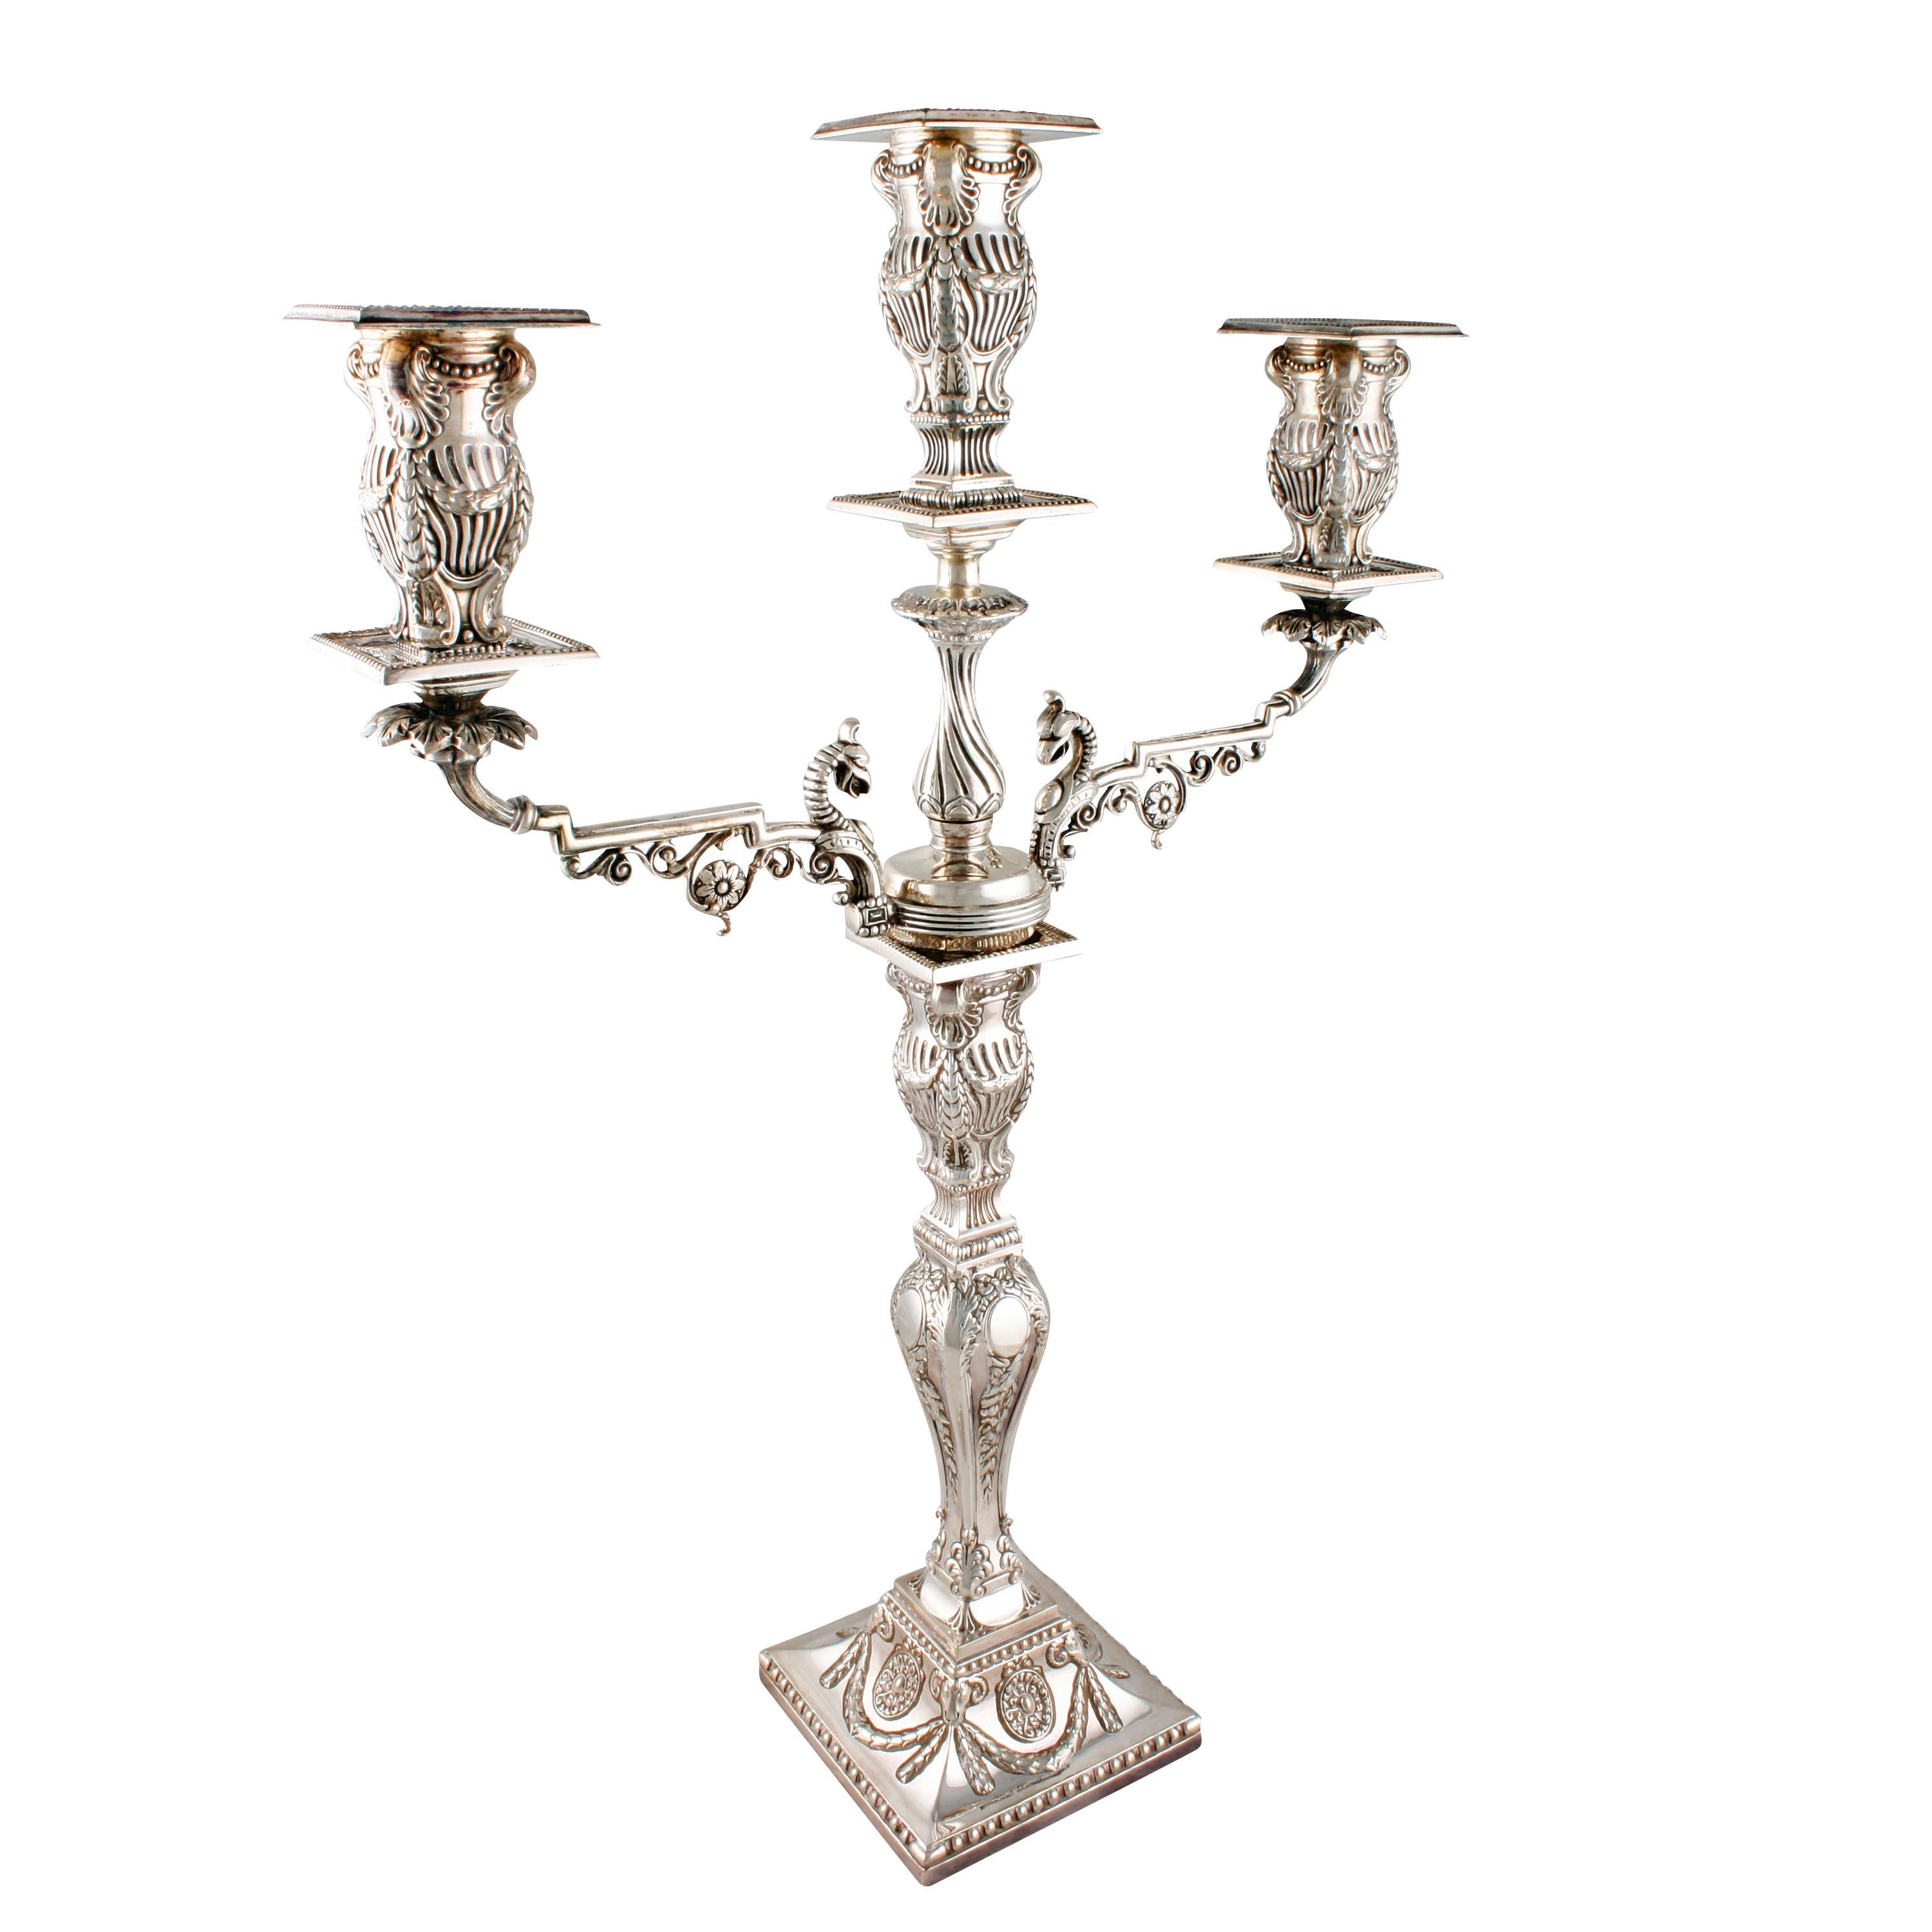 Walker & Hall silver plated candelabra


A late 19th to early 20th century silver plated candelabra by Walker & Hall of Sheffield.

The candelabra is made in an Adams design with three candle holders, two on arms and a central holder that can